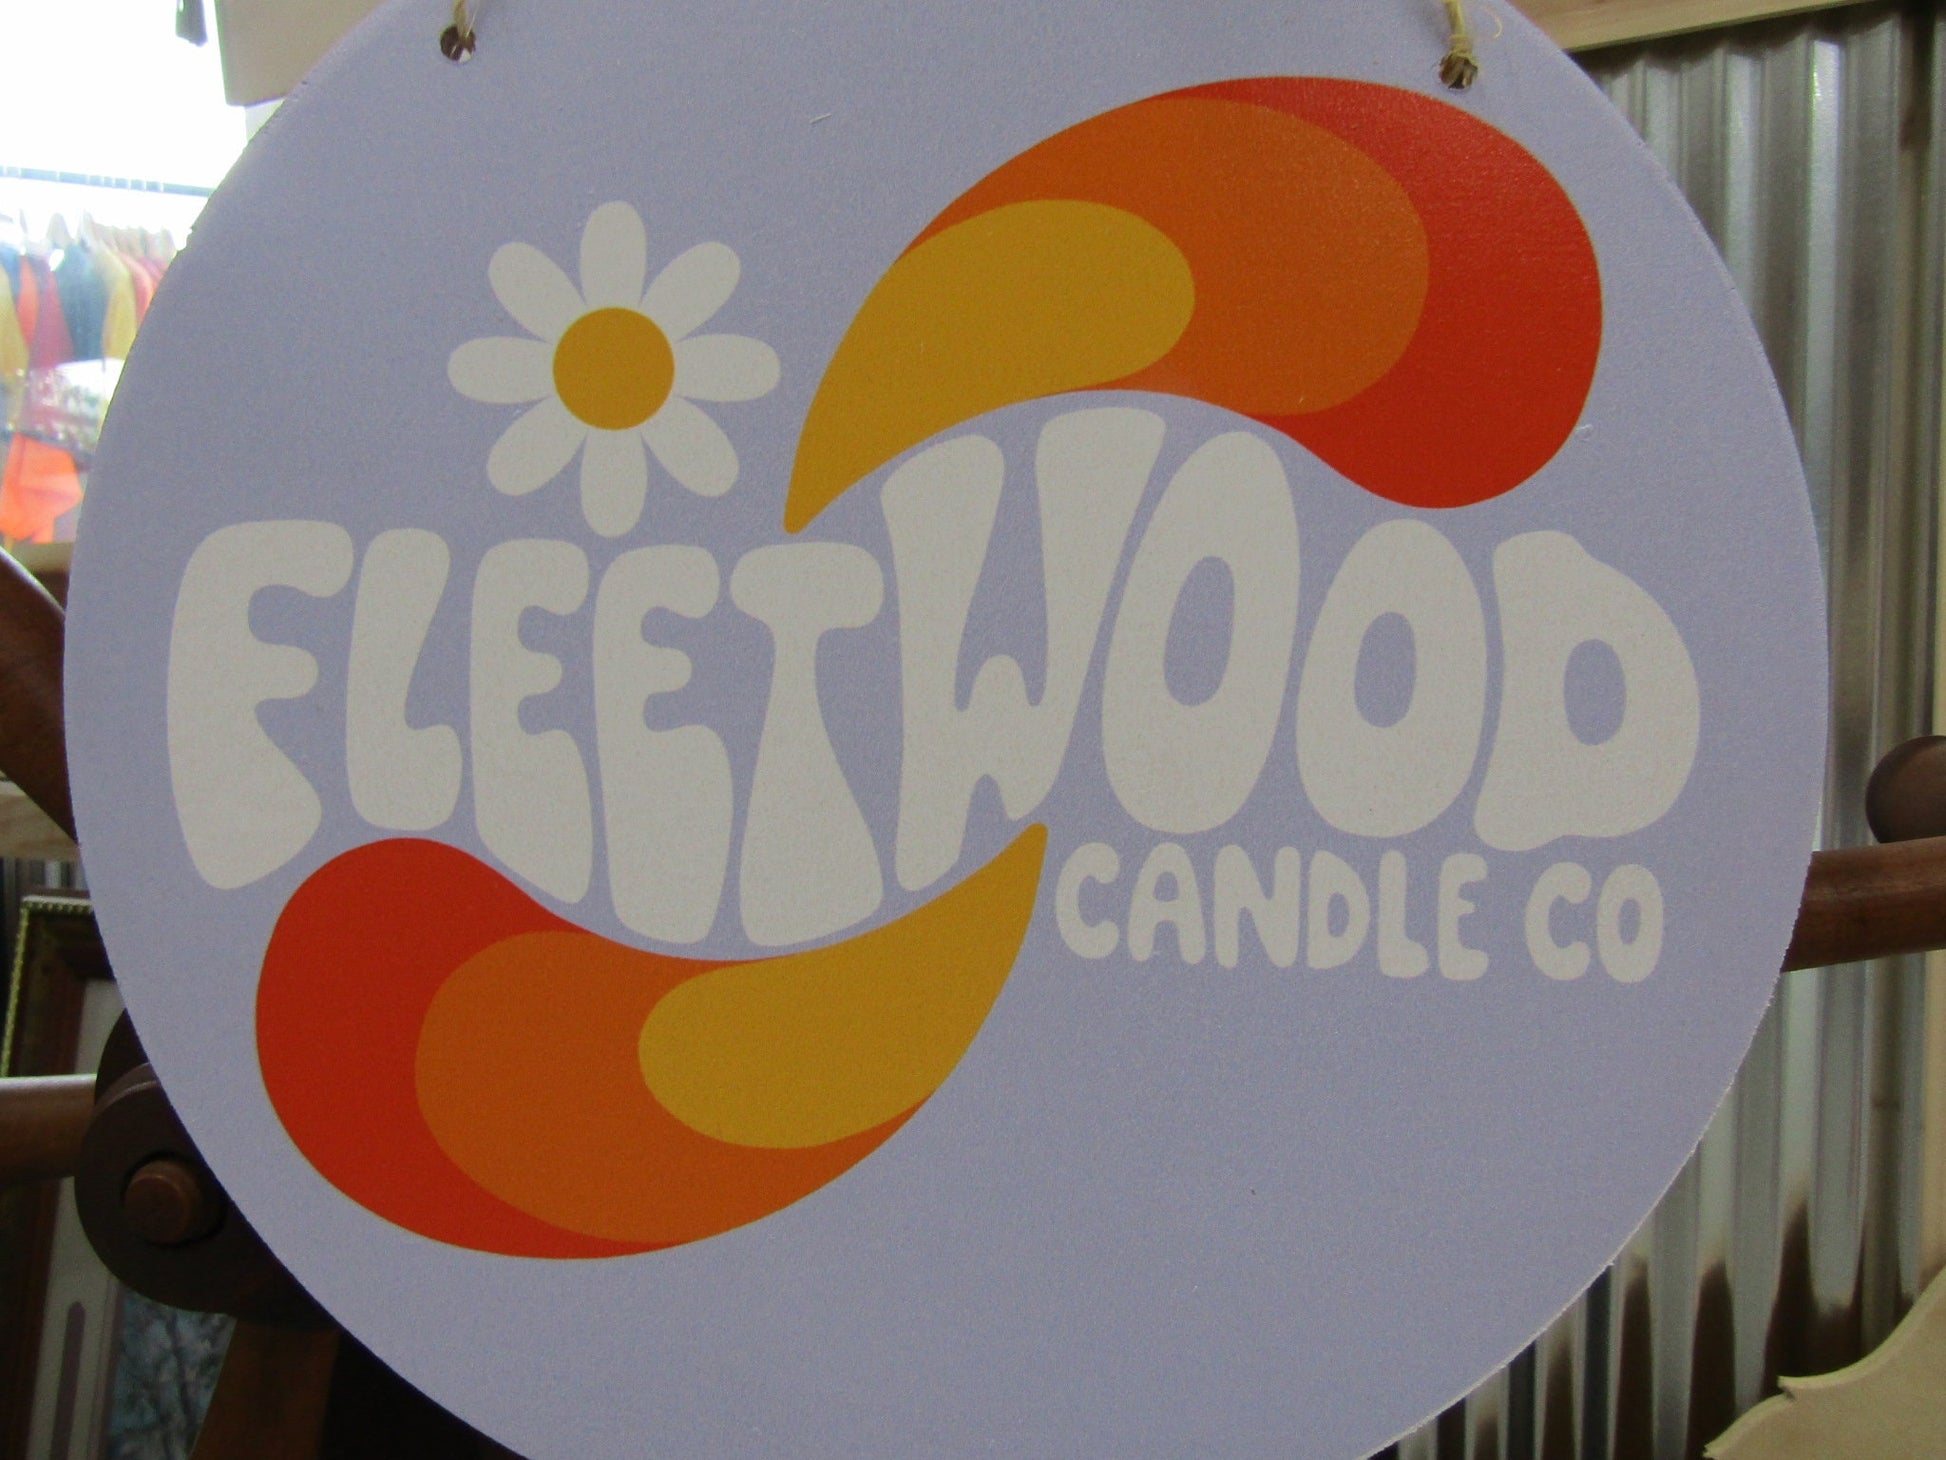 Groovy Fleetwood Candle Co Custom Round Lightweight Business Small Shop Printed On Wood Floral Your Logo Circle Booth Vendor Table Wall Sign